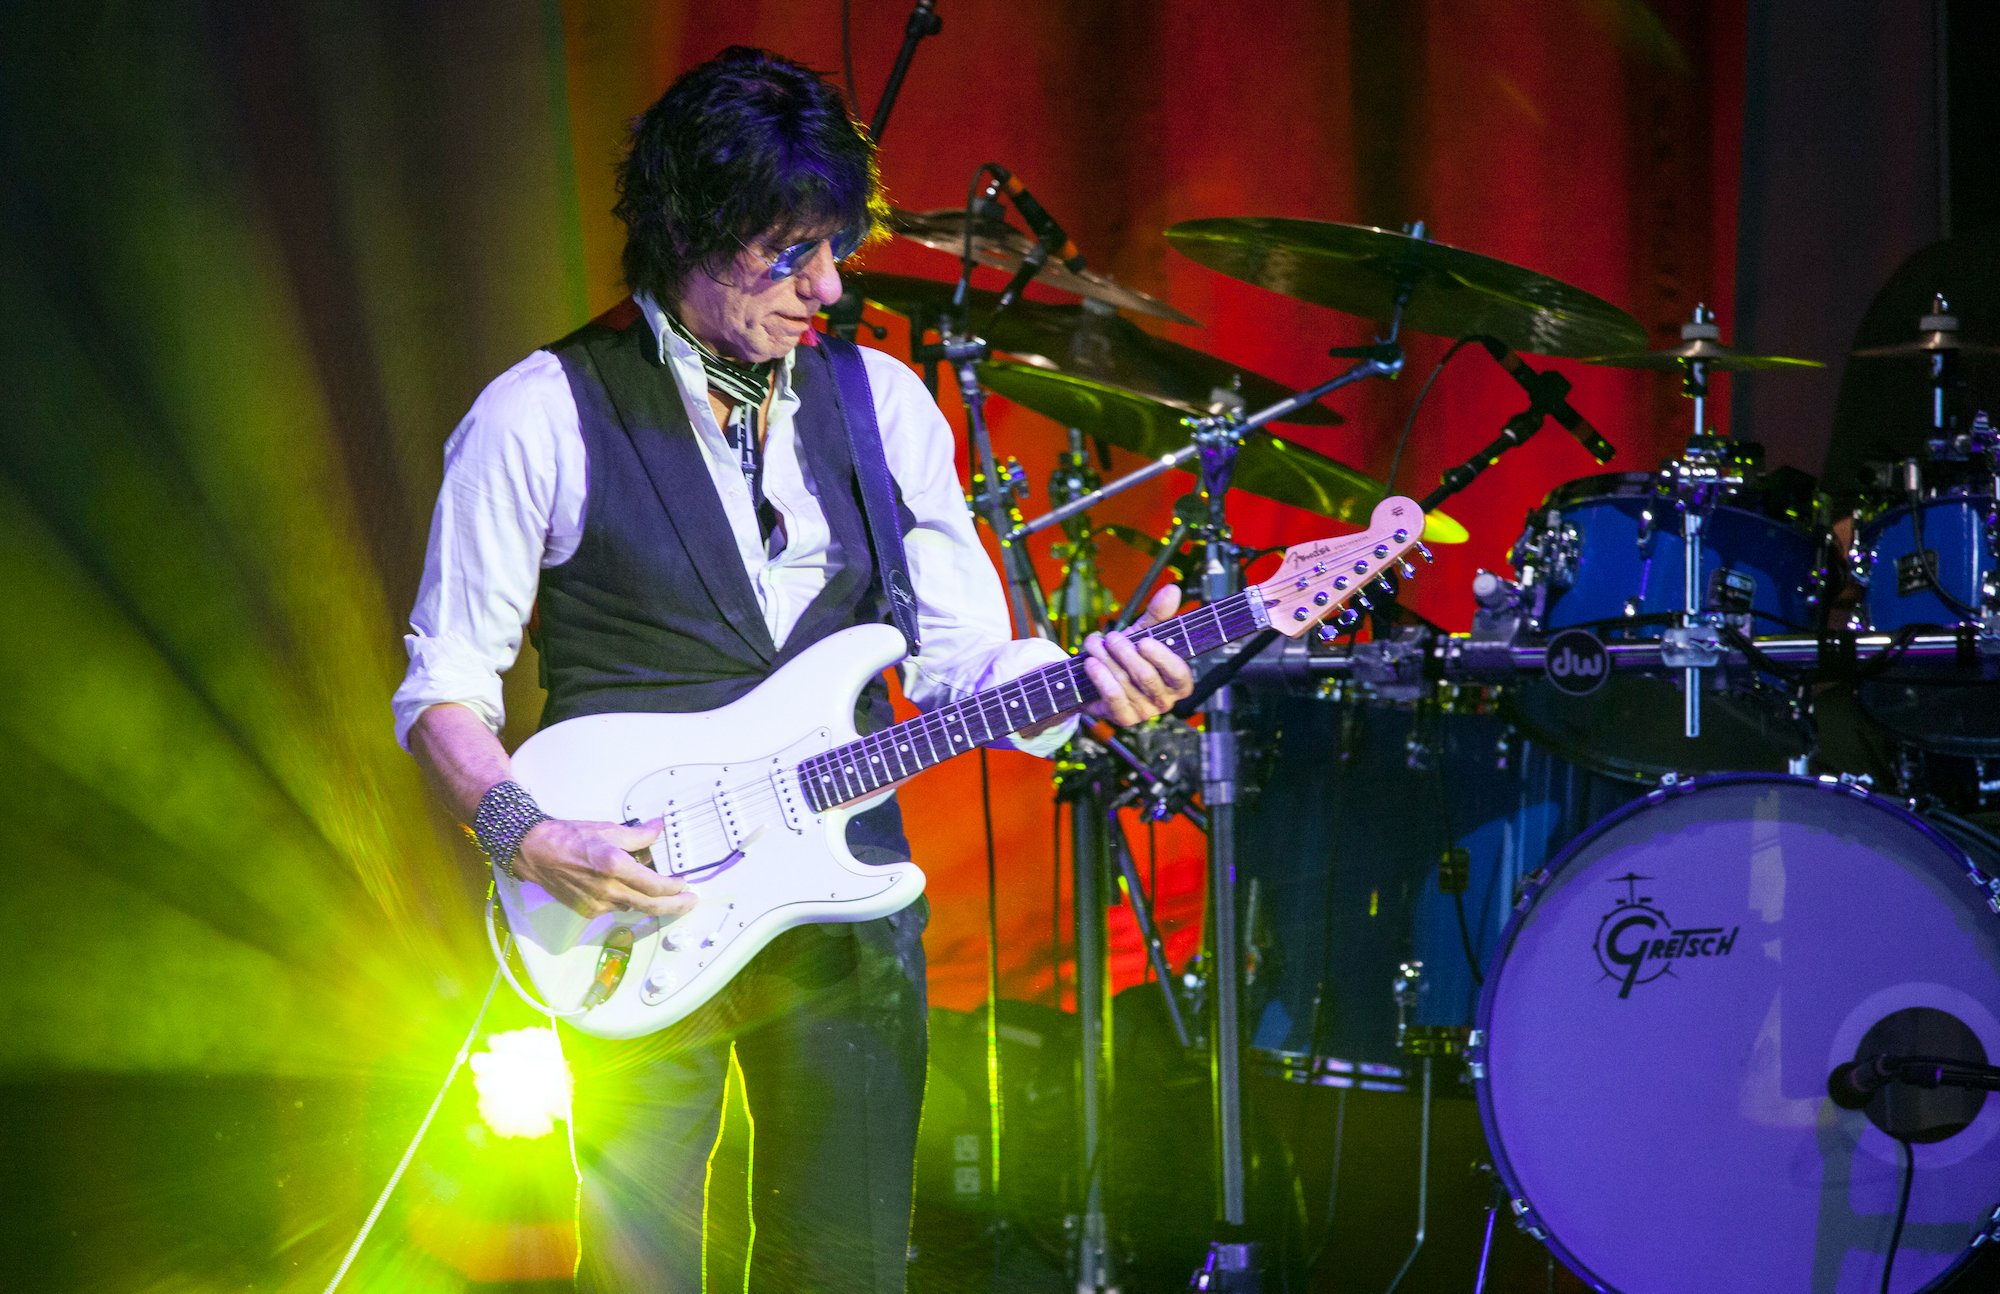 Jeff Beck on stage performing